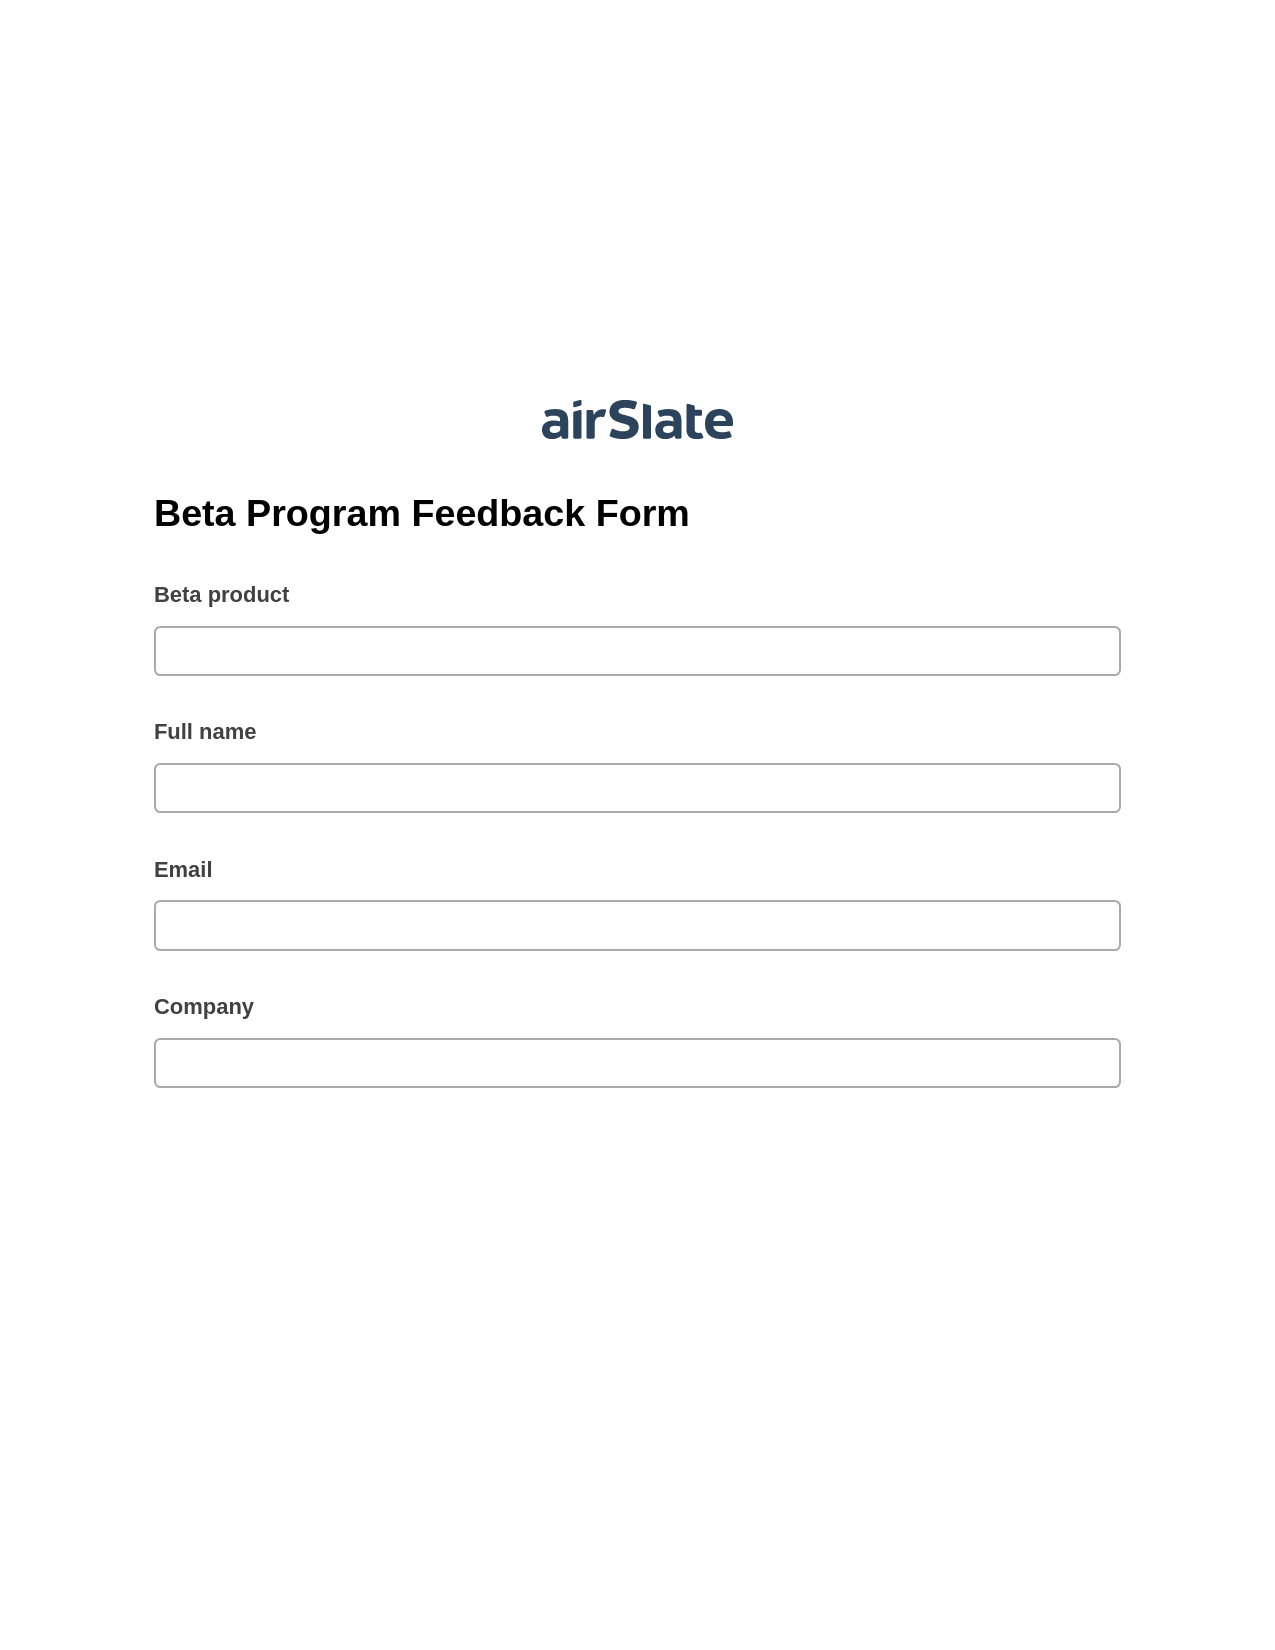 Multirole Beta Program Feedback Form Pre-fill from NetSuite Records Bot, Email Notification Bot, Export to Excel 365 Bot